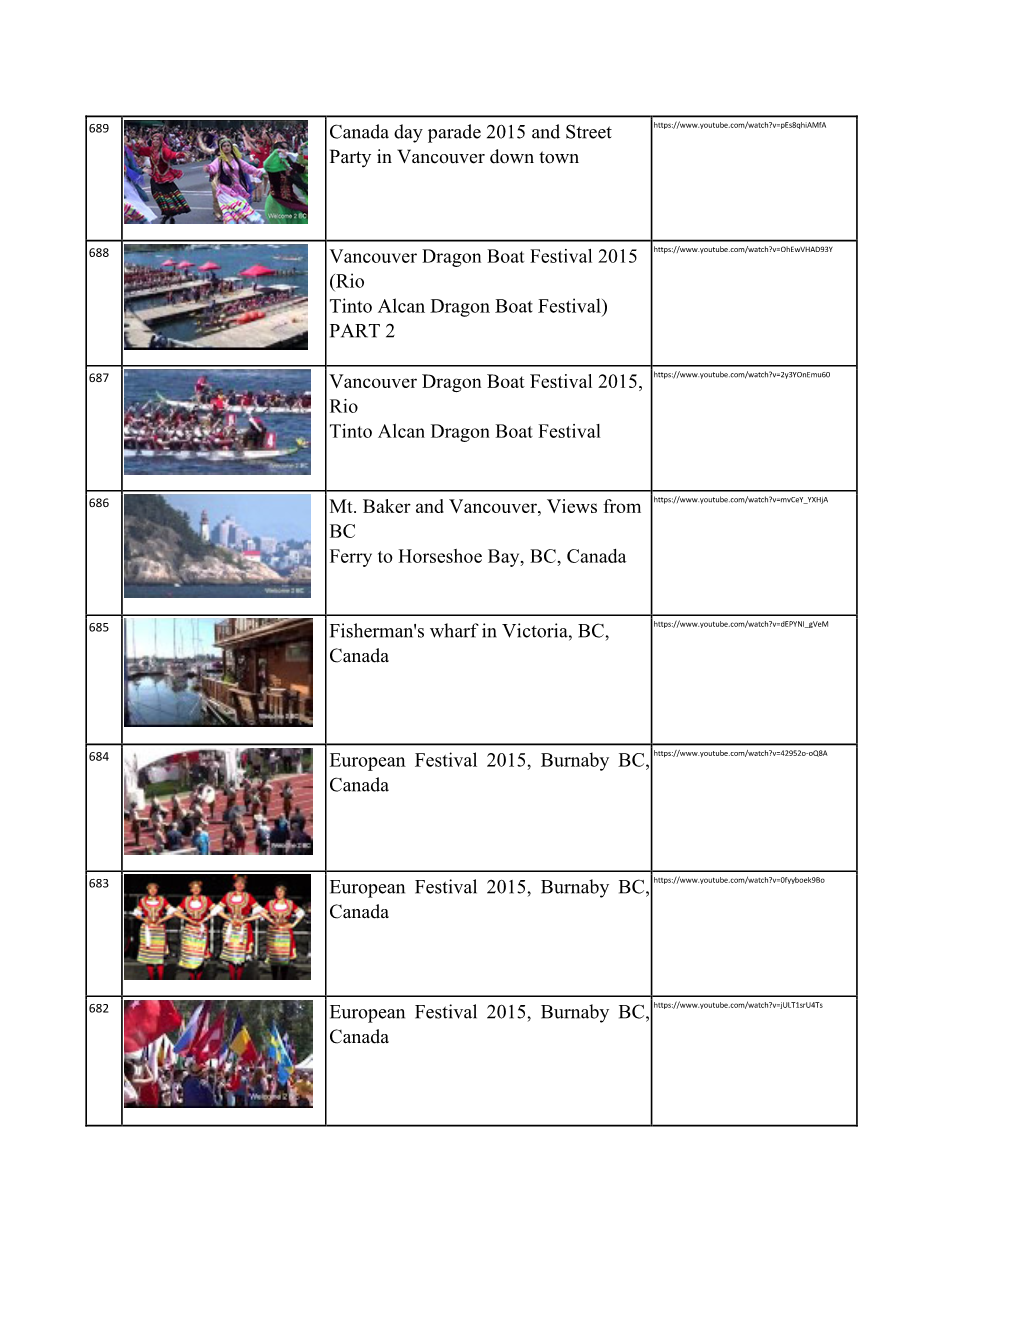 Canada Day Parade 2015 and Street Party in Vancouver Down Town Vancouver Dragon Boat Festival 2015